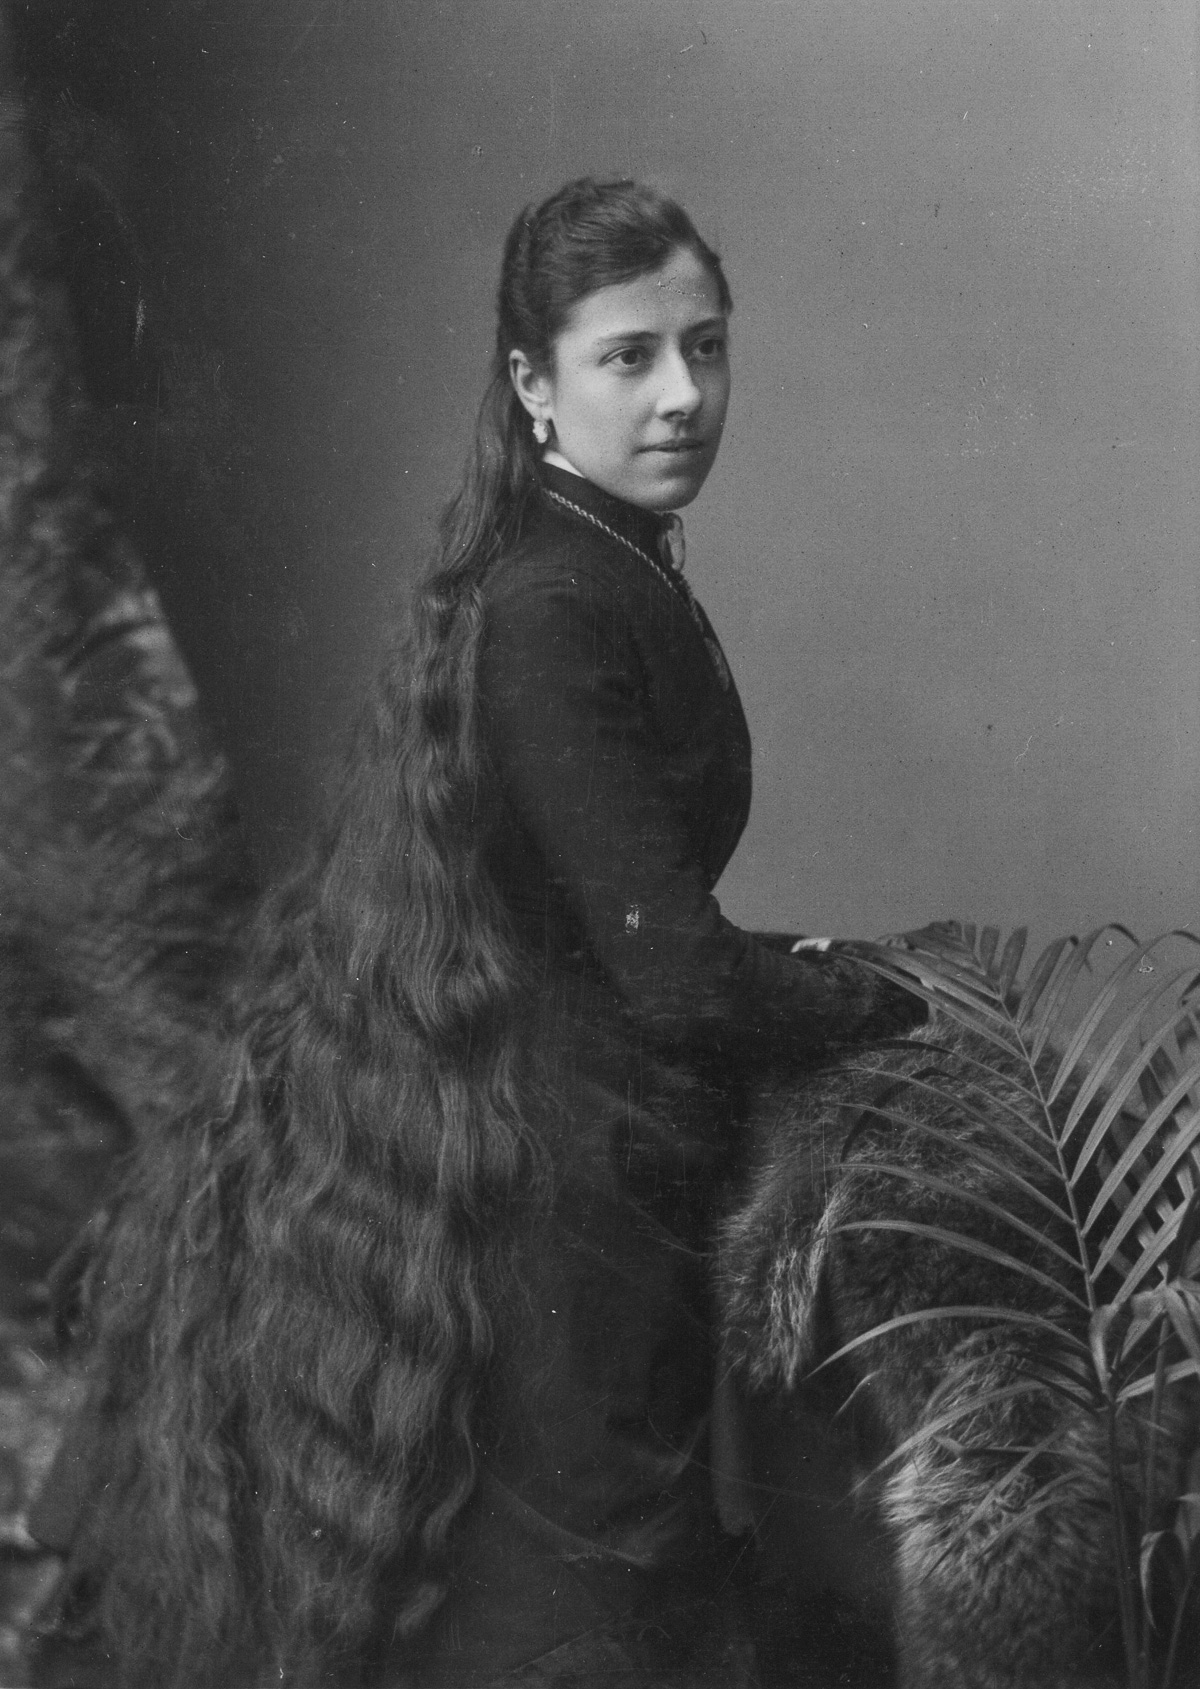 Portrait of a young woman with very long hair, circa 1900s